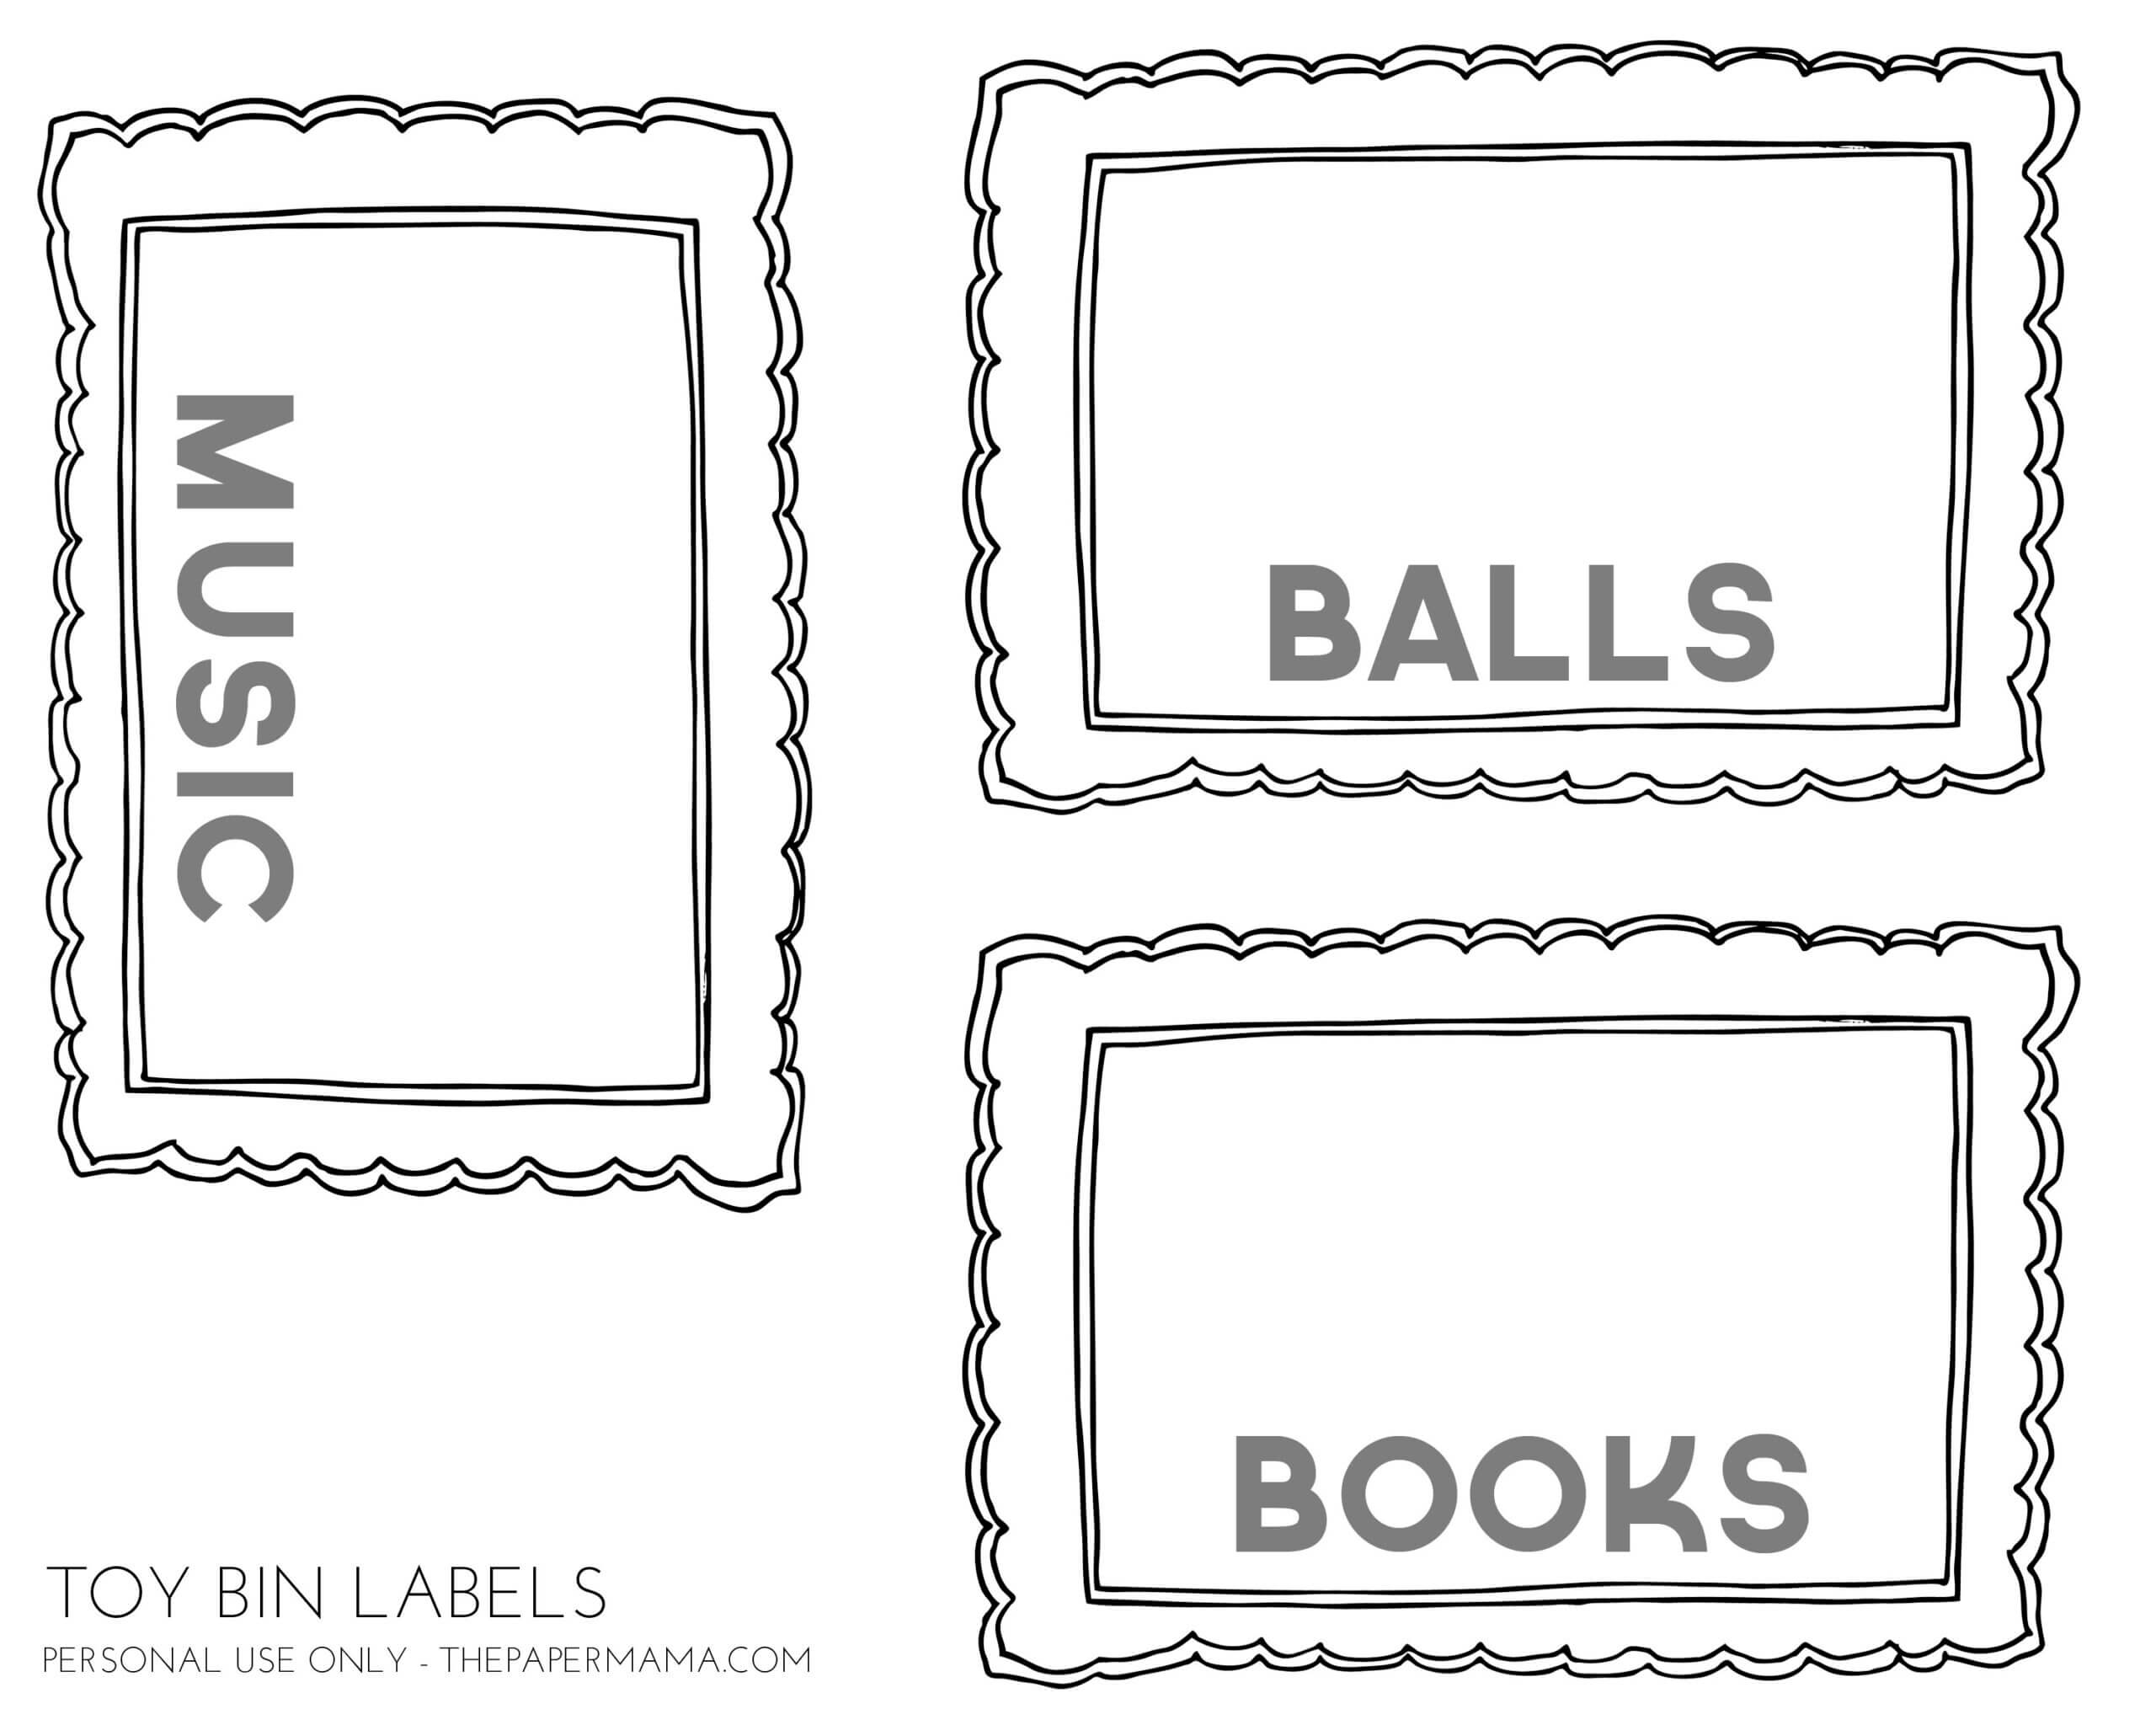 20+ Useful Moving Labels For All Purposes | Kittybabylove Intended For Bin Labels Template